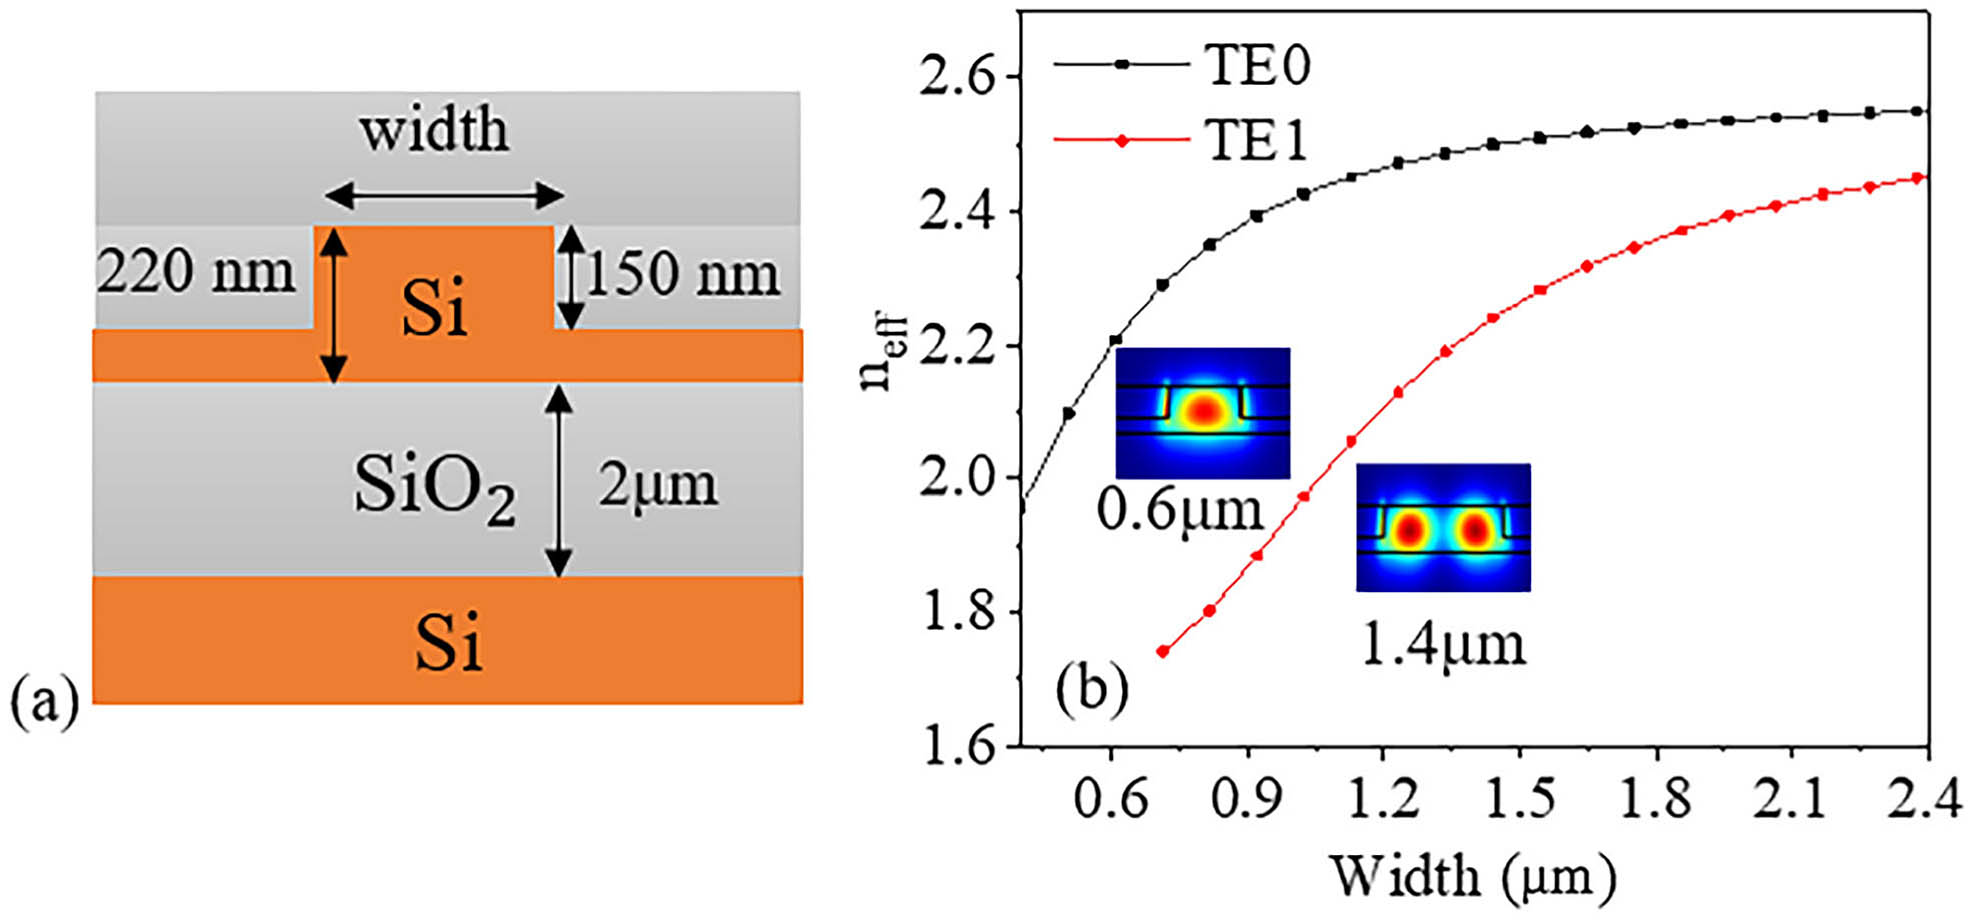 (a) Cross-section diagram of the SOI ridge waveguide. (b) Calculated effective refractive index of the fundamental (black) and first-order (red) TE modes as a function of the ridge waveguide width at 2025 nm. Inset: the spatial distribution of the fundamental and second-order polarized optical modes into the SOI ridge waveguide with a width of 0.6 µm and 1.4 µm at 2025 nm, respectively.